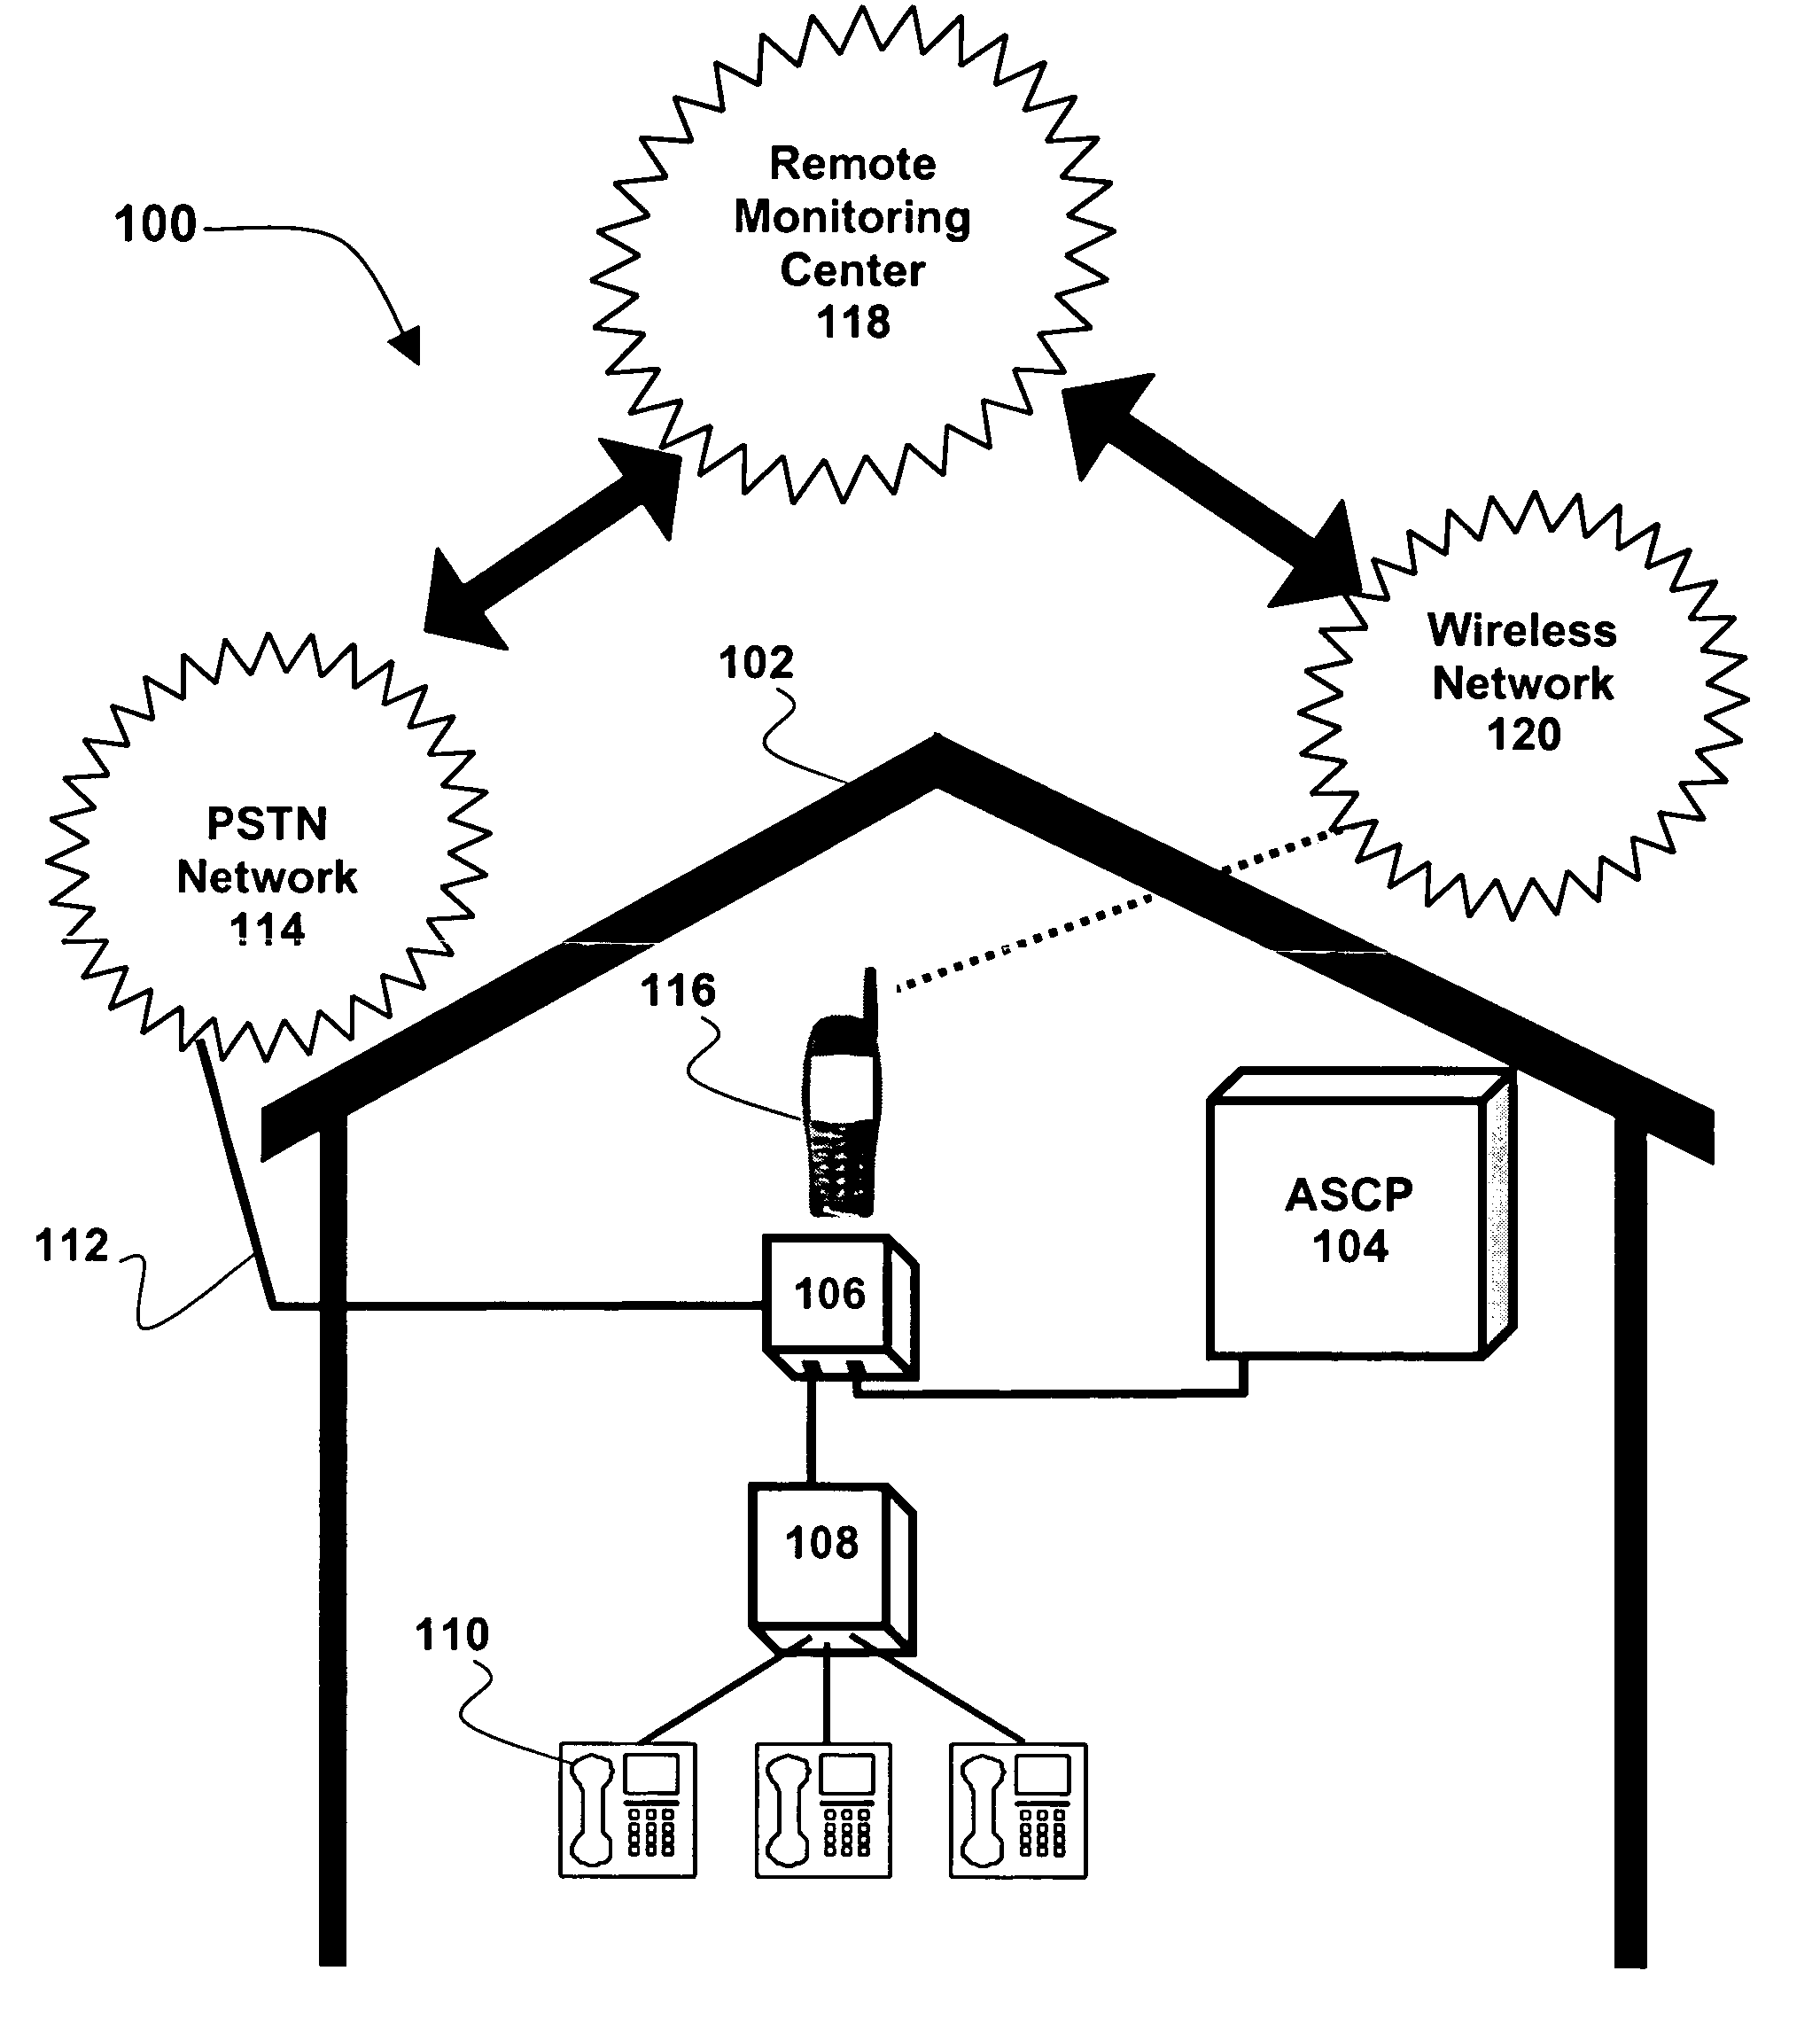 Systems and methods for providing non-dedicated wireless backup service for monitored security systems